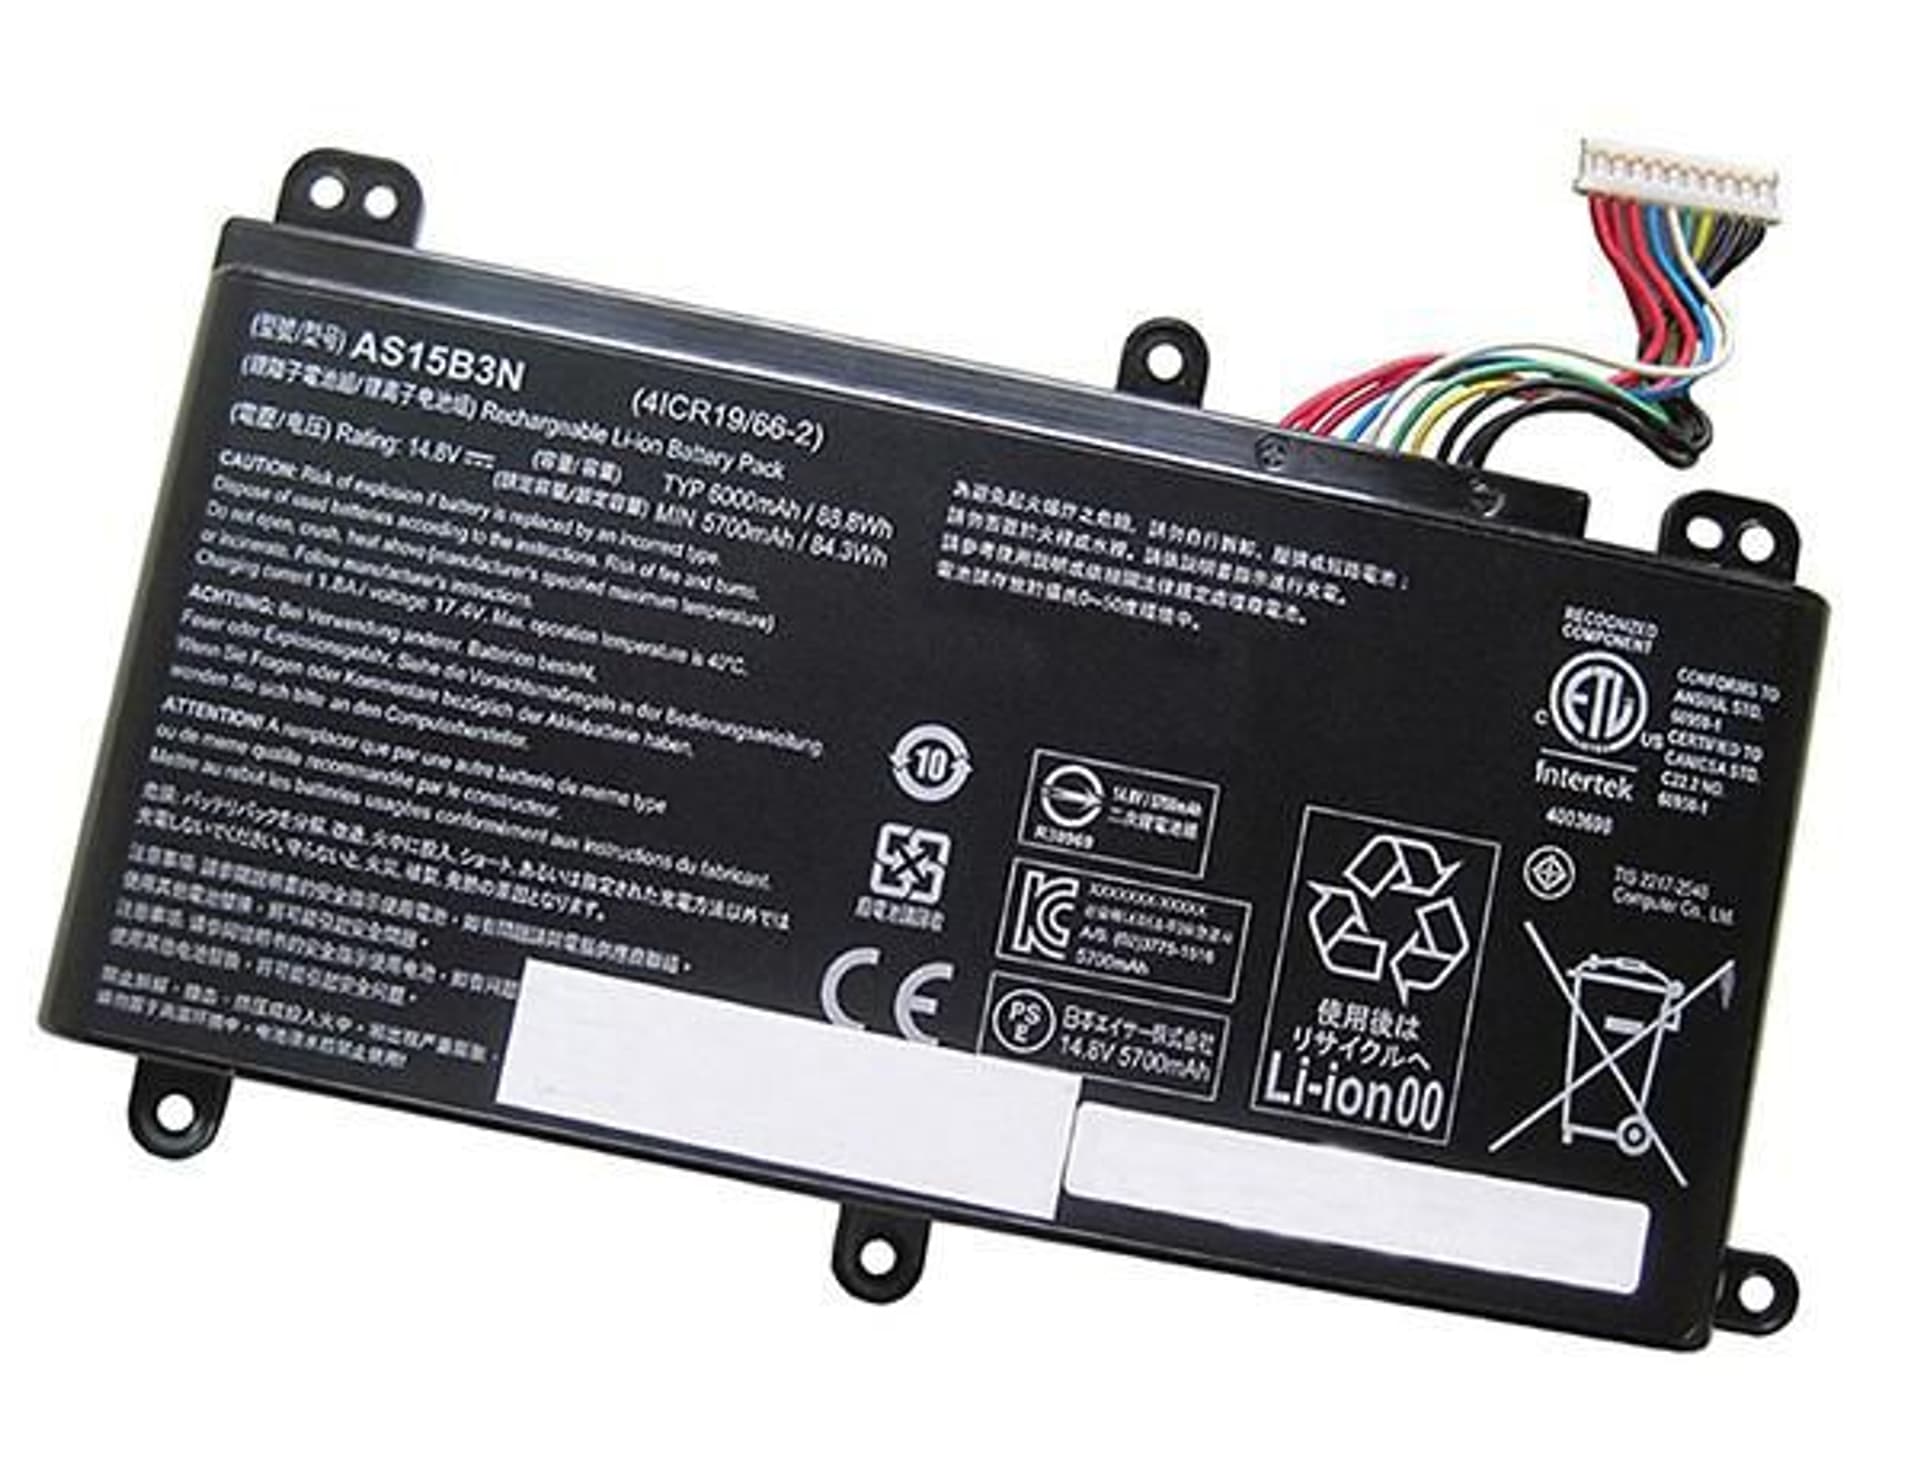 

CoreParts Laptop Battery for Acer